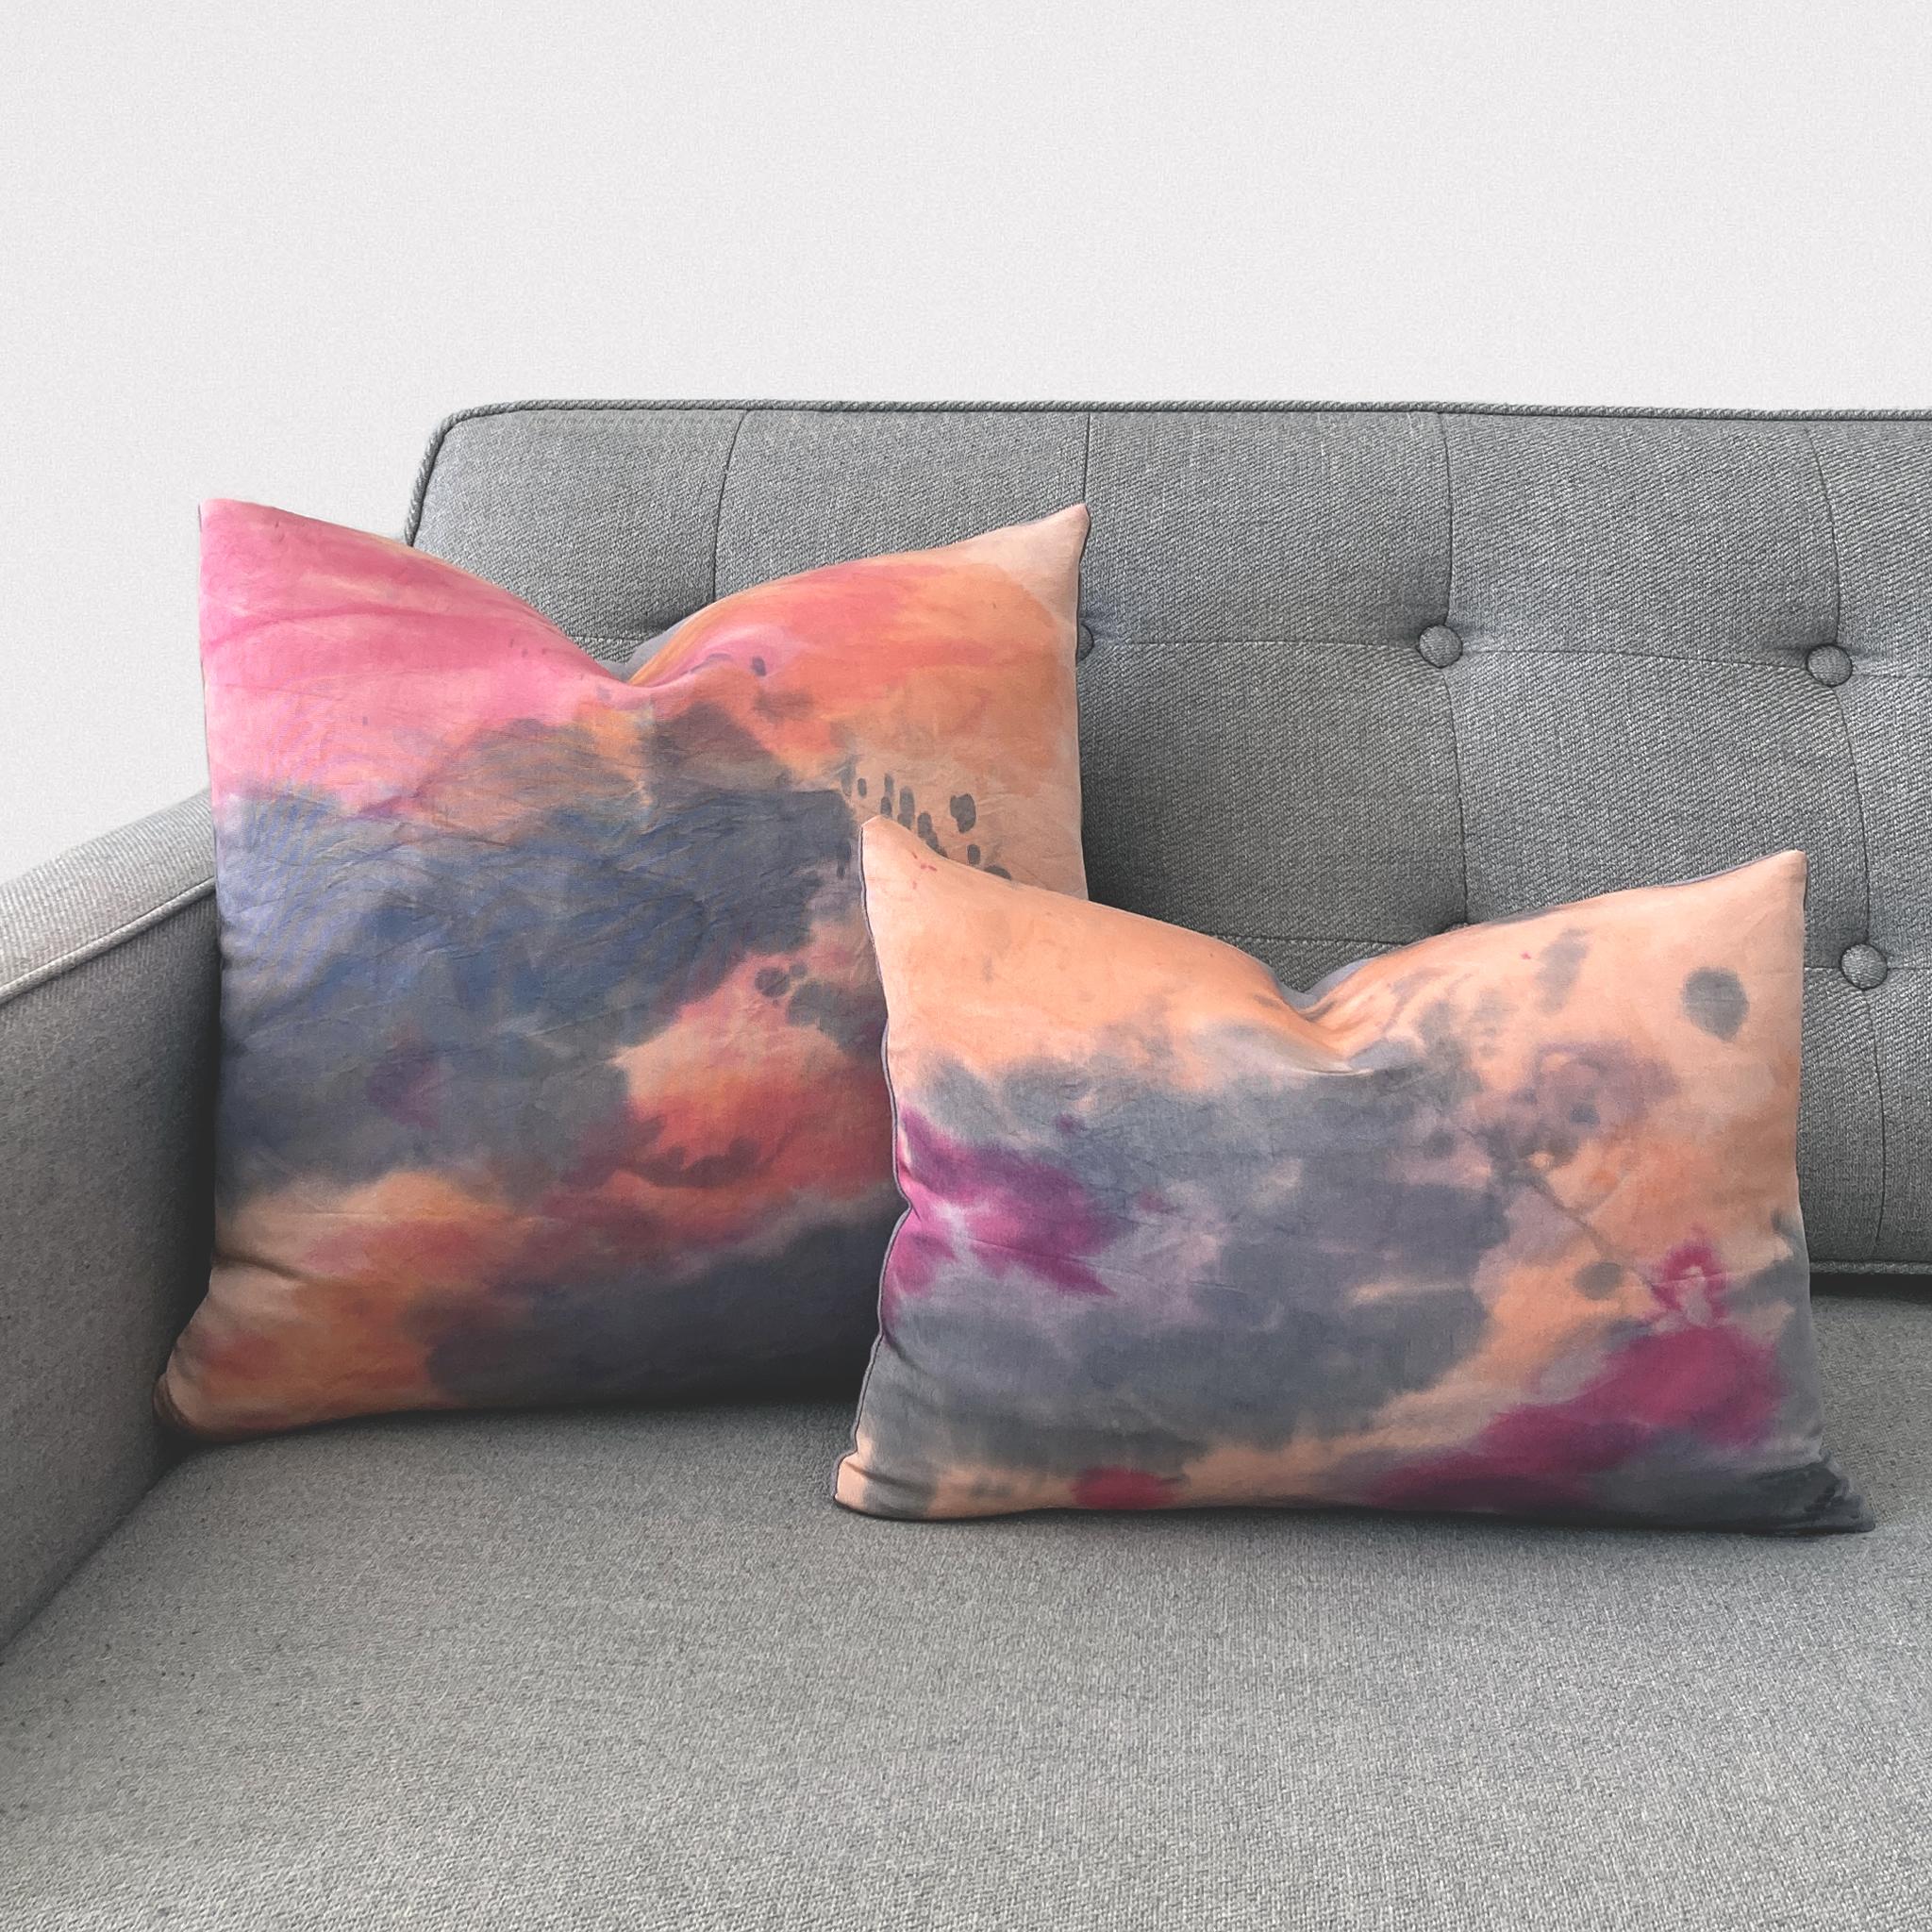 Blush silk faille pillow dyed with Magenta, Orange, and Gray in an abstract pattern with gray linen backing. Hand-painted and sewn in New York City, down pillow insert made locally in NYC. Pillow measures 12 x 16 inches. Each silk pillow is handmade